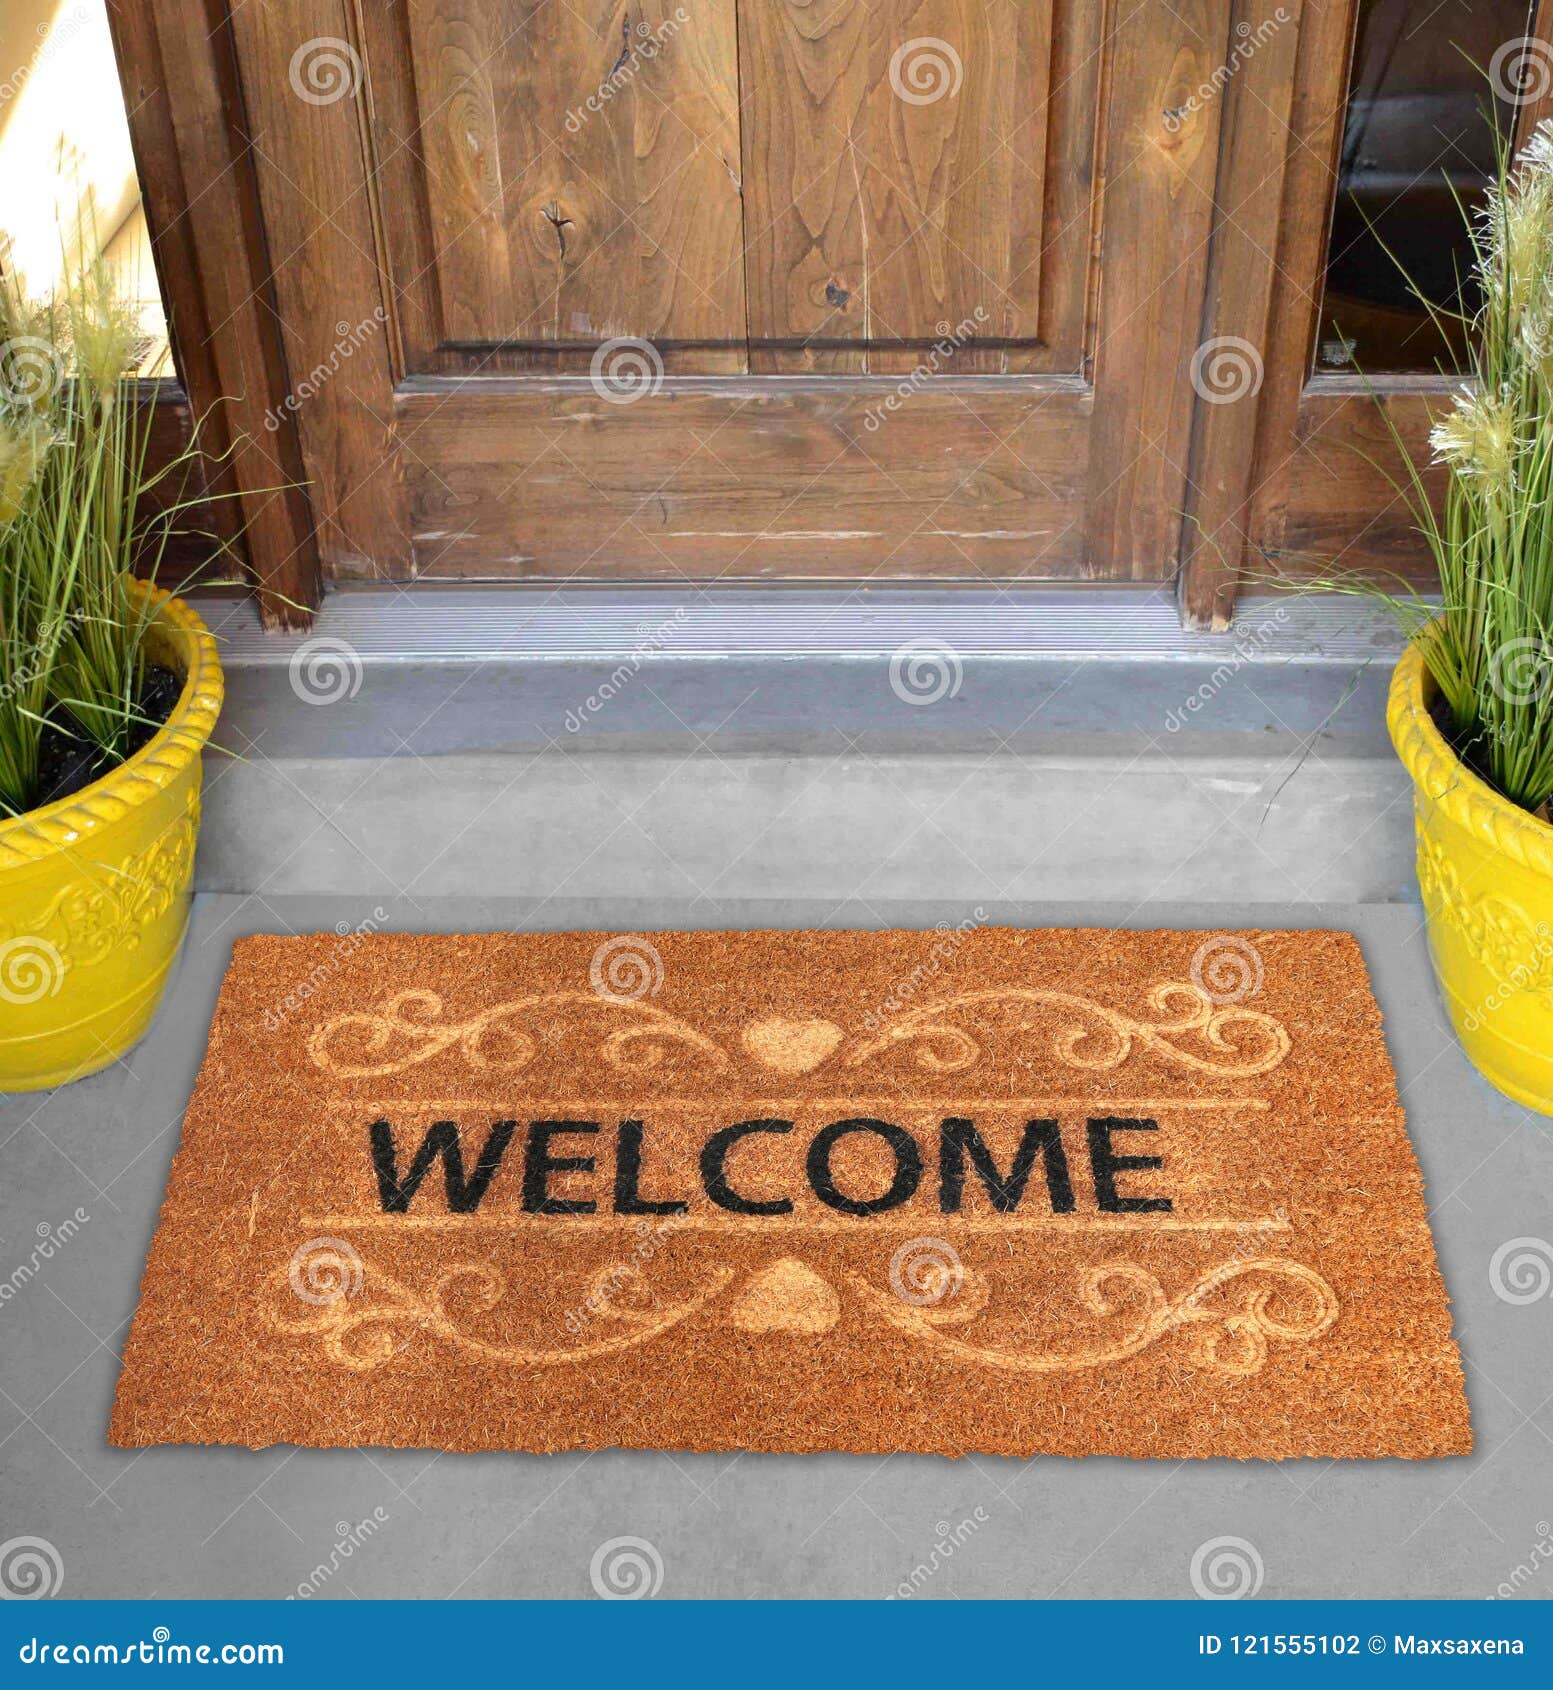 https://thumbs.dreamstime.com/z/welcome-door-mat-white-background-placed-outside-door-welcome-door-mat-white-background-placed-outside-door-121555102.jpg